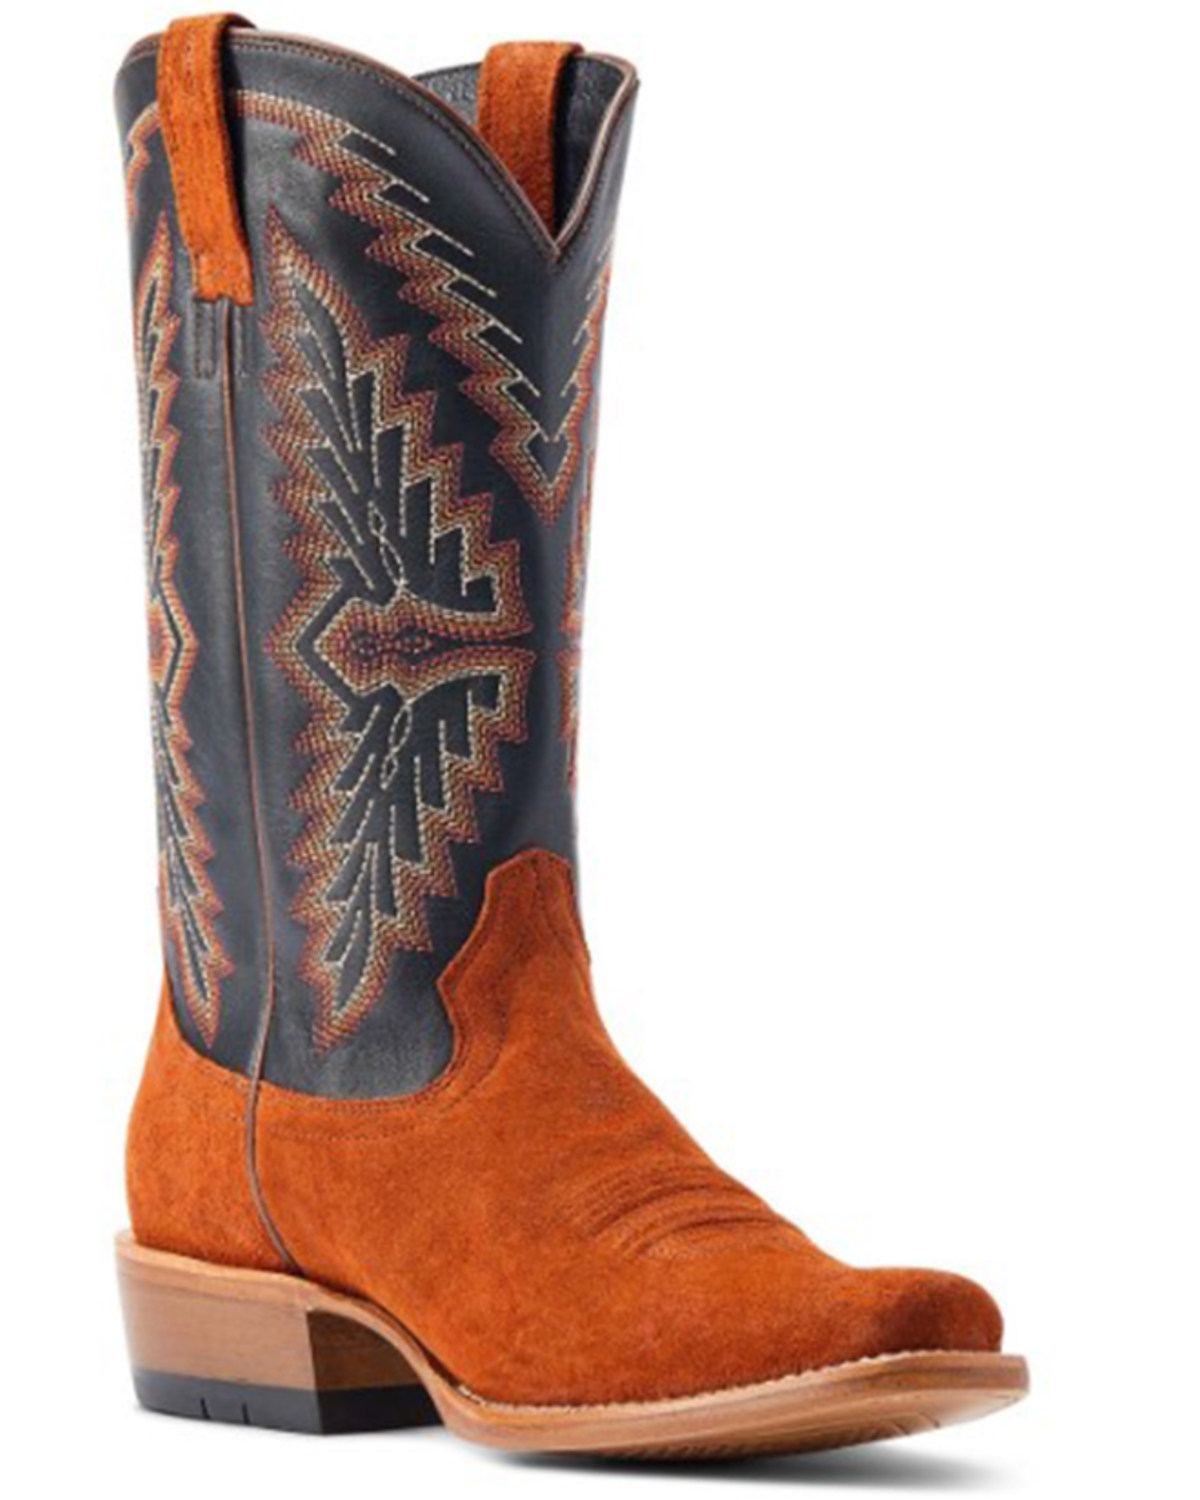 Ariat Men's Futurity Showman Roughout Western Boots - Square Toe